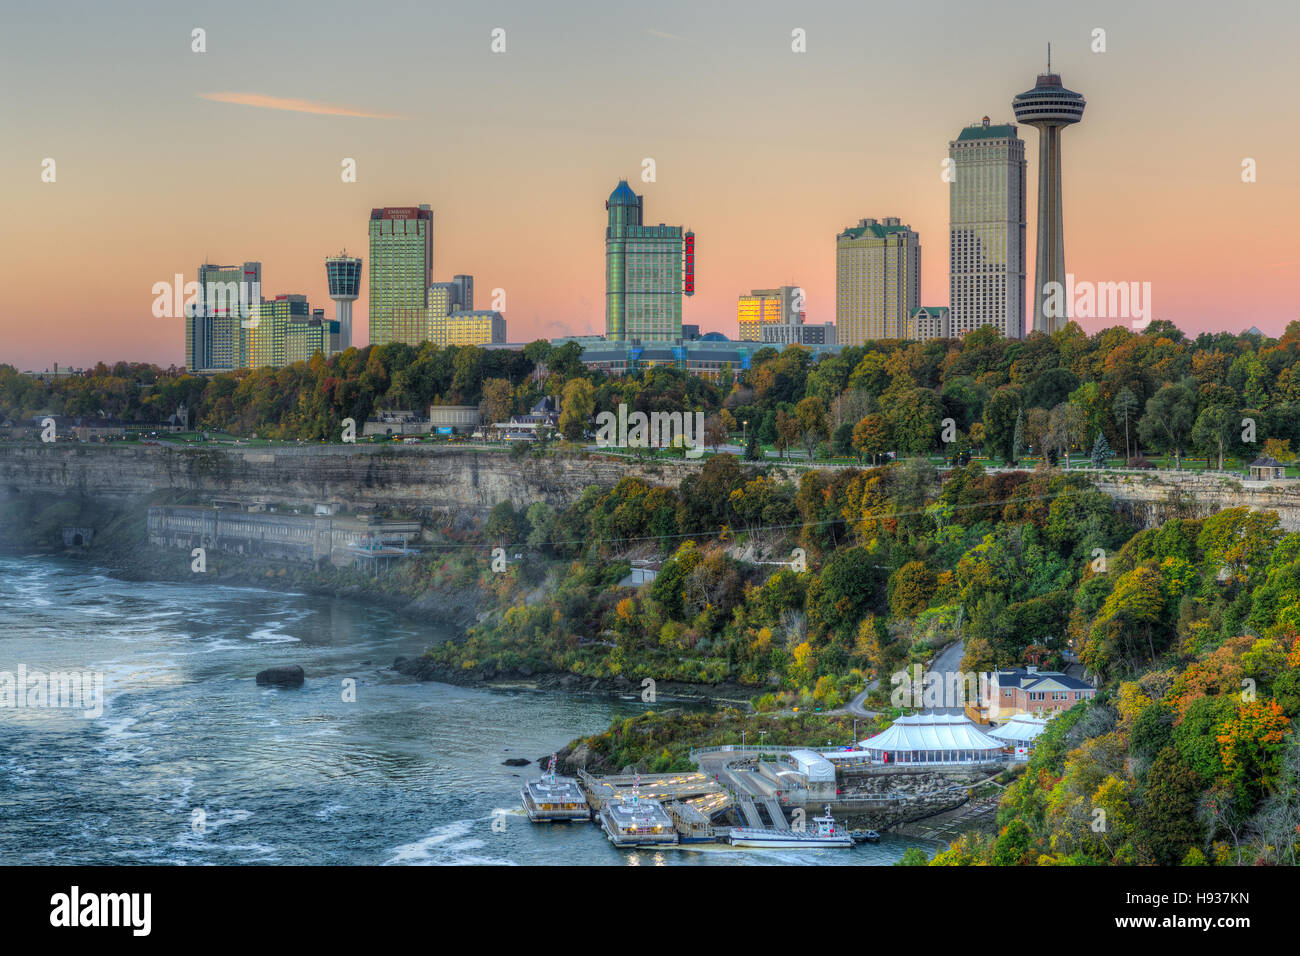 A view of the Niagara River and skyline of Niagara Falls, Ontario just before sunrise. Stock Photo